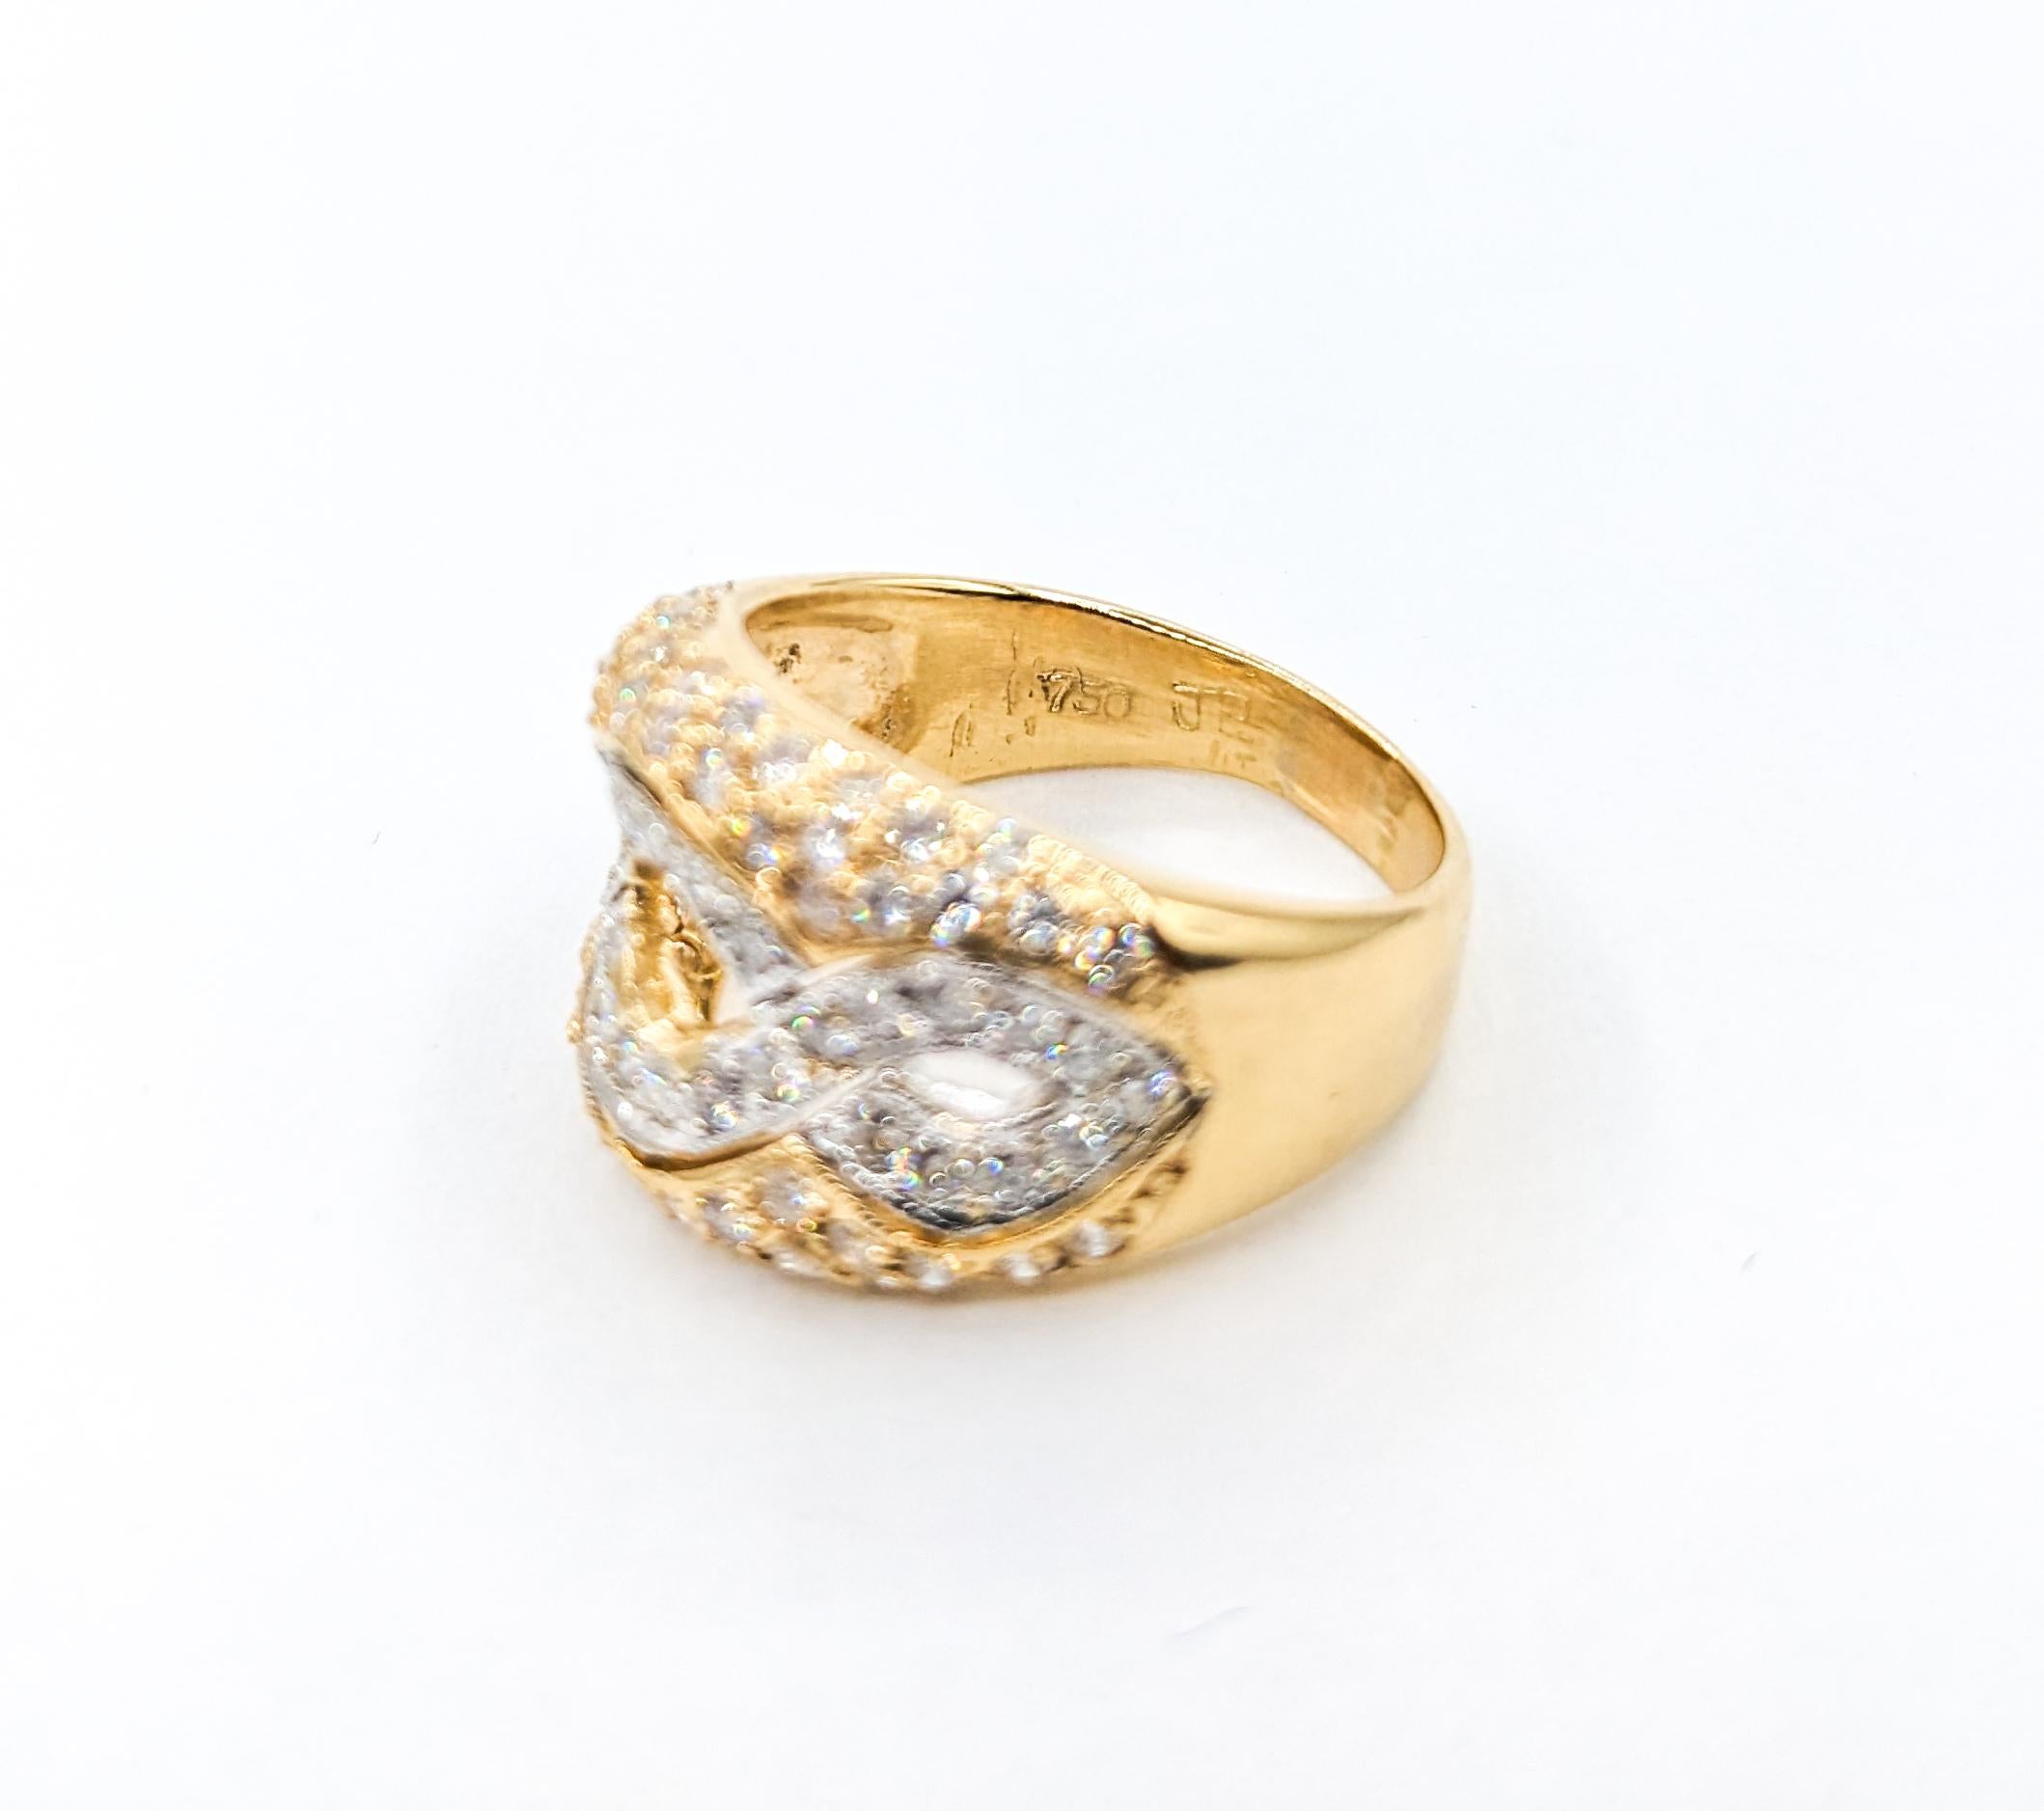 1ctw Diamond Ring In Two-Tone Gold For Sale 2